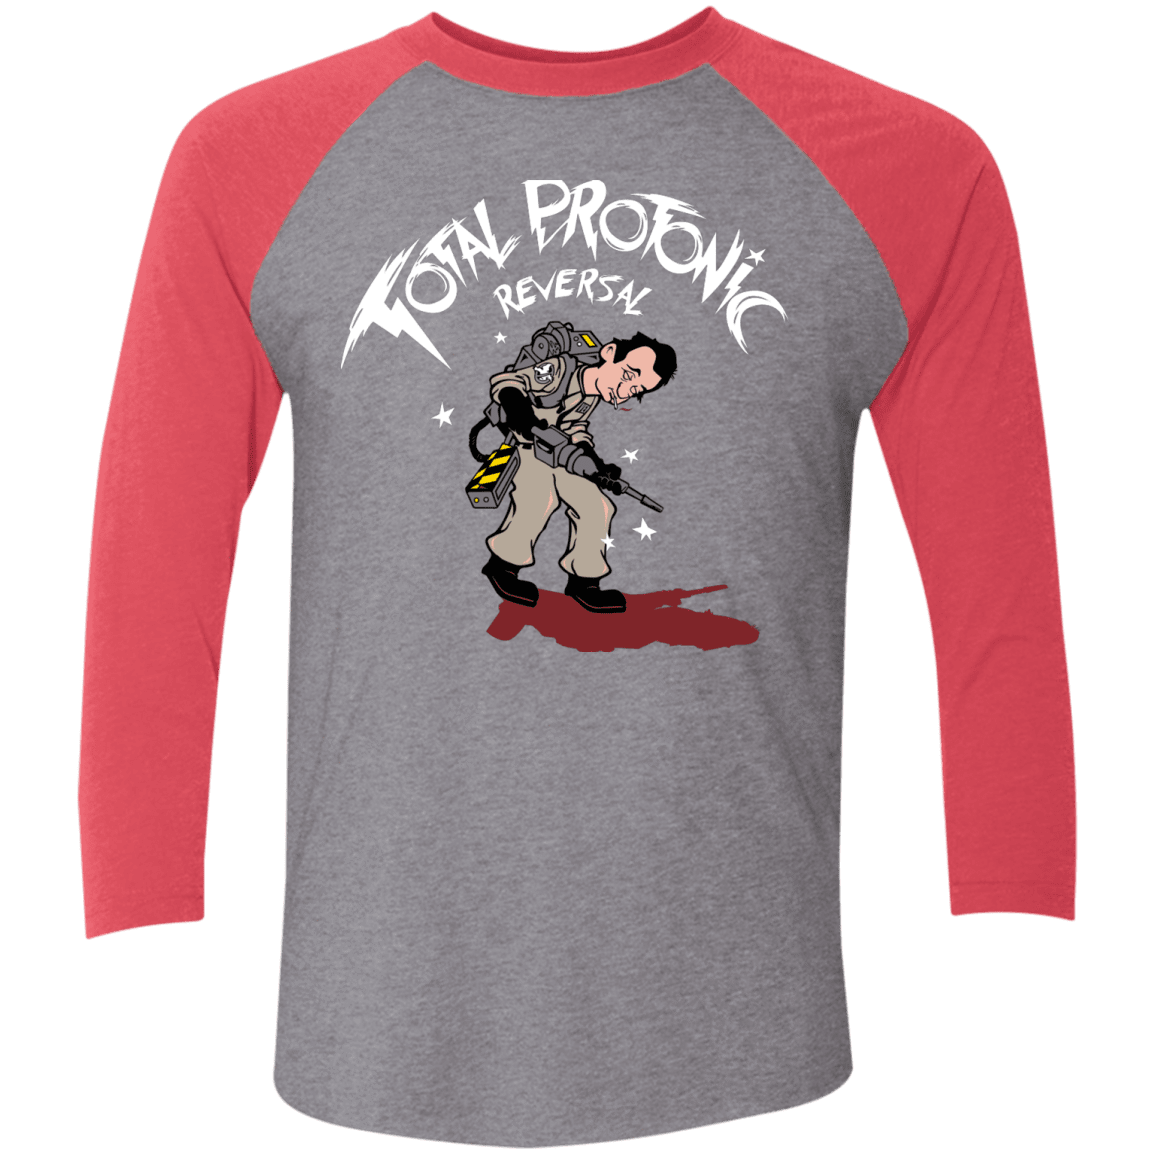 T-Shirts Premium Heather/ Vintage Red / X-Small Total Protonic Reversal Men's Triblend 3/4 Sleeve